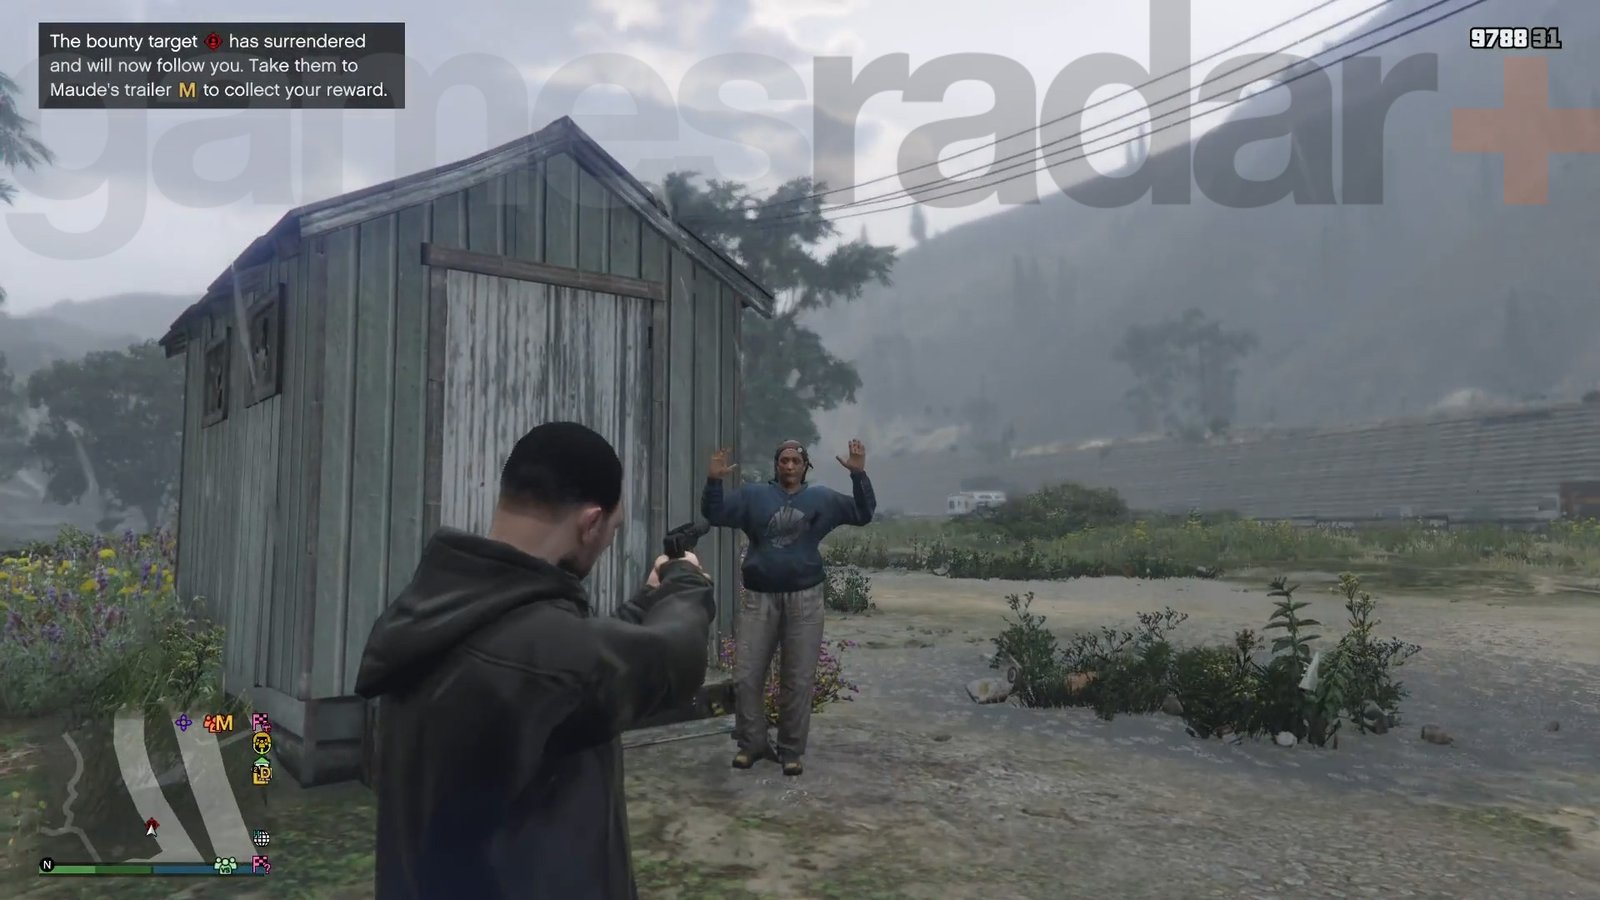 Catching a target in GTA Online Bounty Hunting